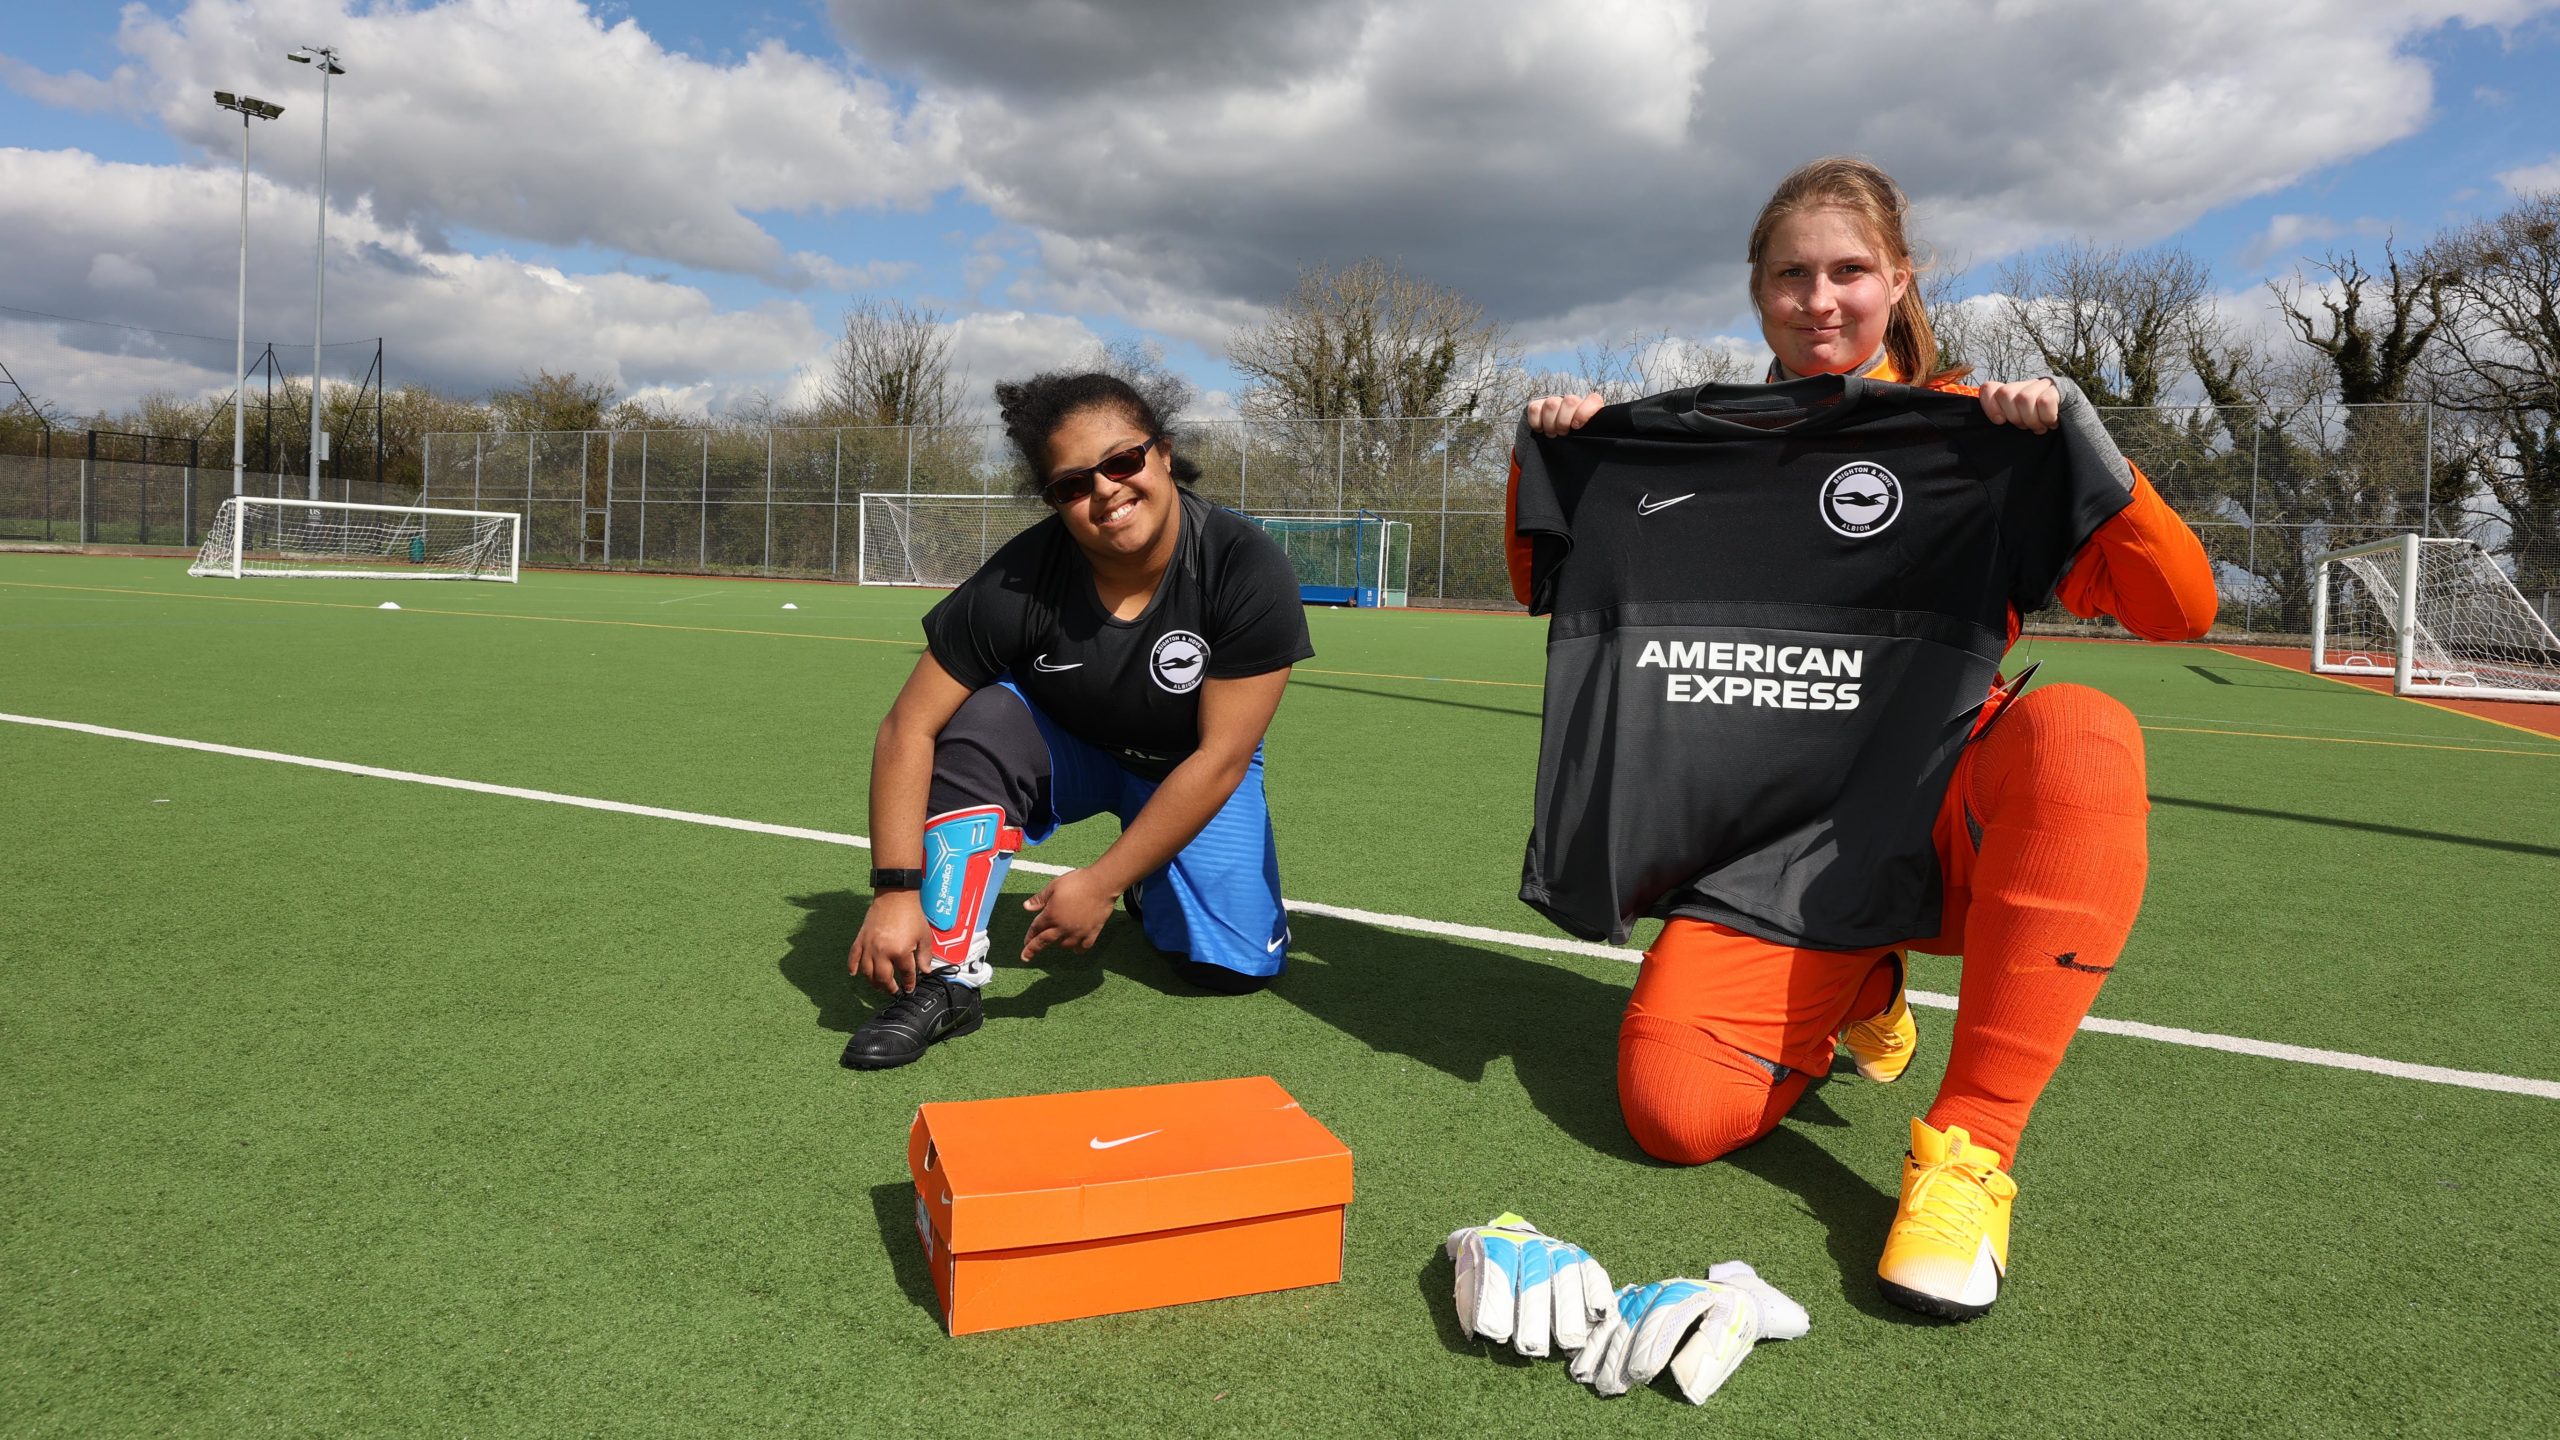 Female disability participants surprised with free boots and Albion kit